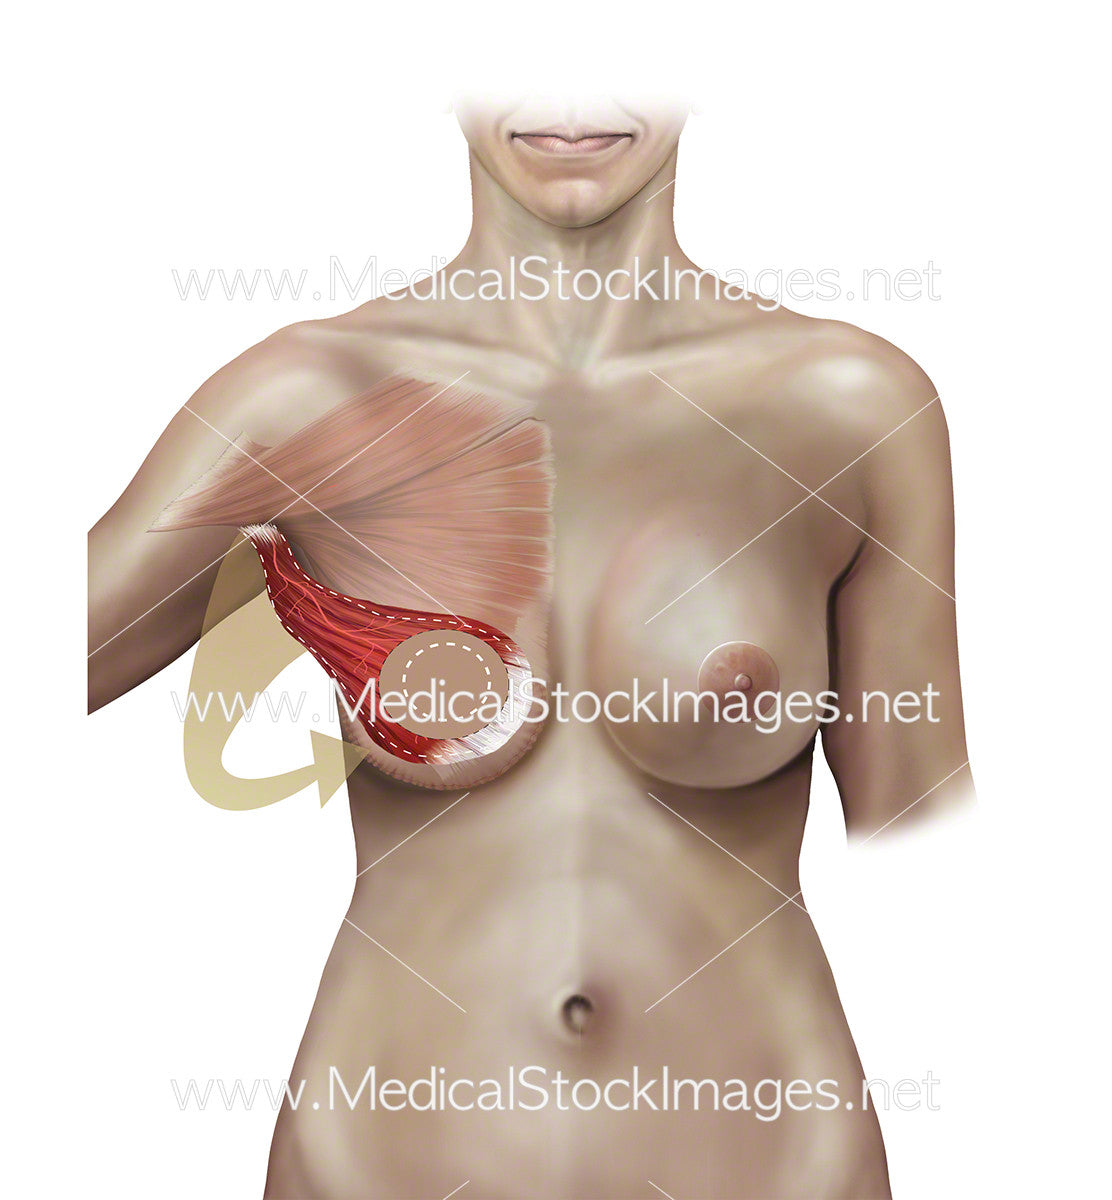 Stage C Autologous Breast Reconstruction – Medical Stock Images Company